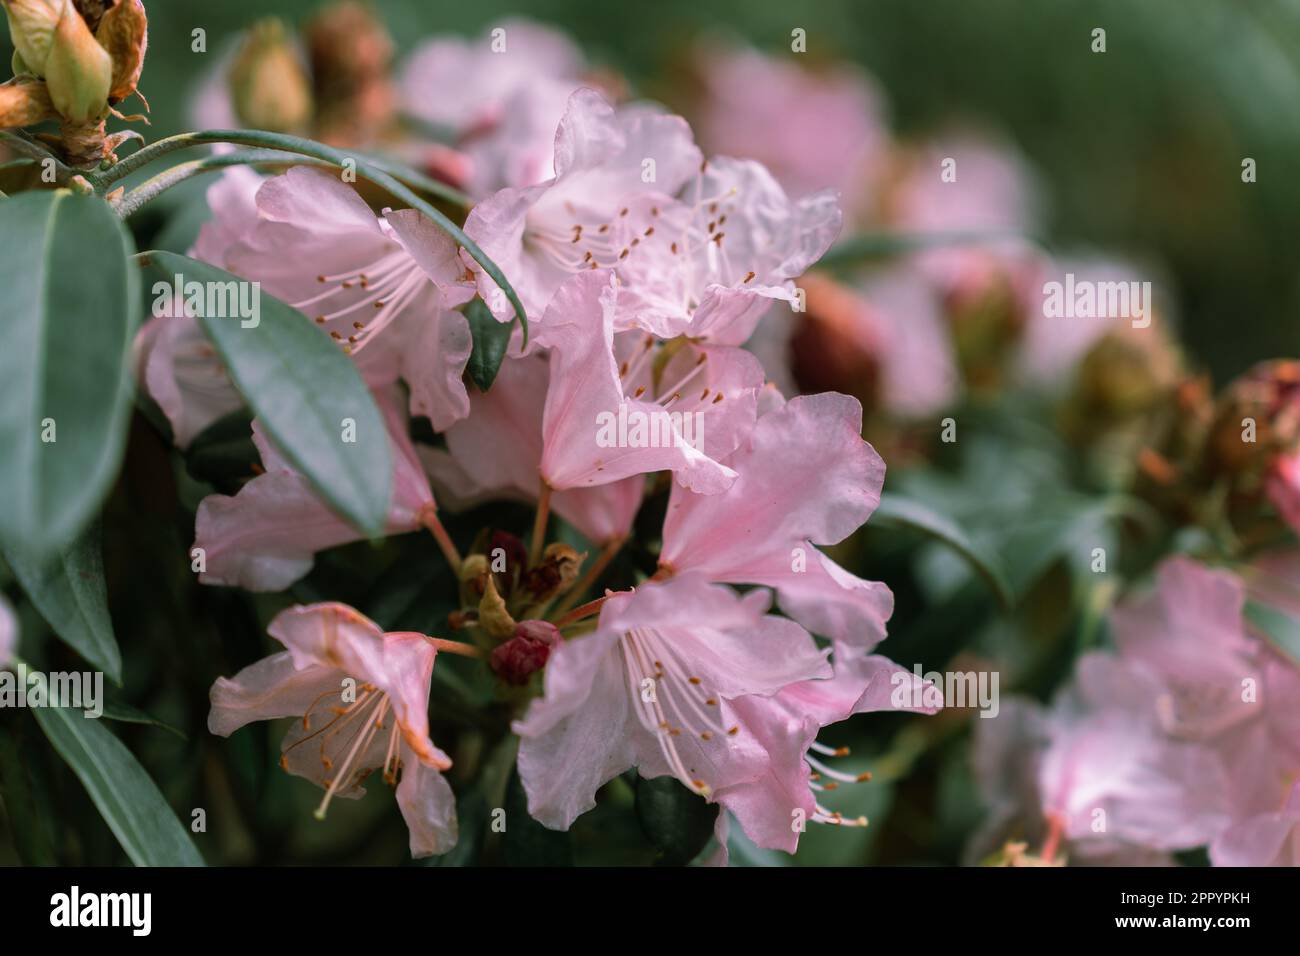 Pink flowers and green leaves of Rhododendron principis is an evergreen shrub growing 2 to 6 m tall with leathery leaves and pink flowers. Stock Photo